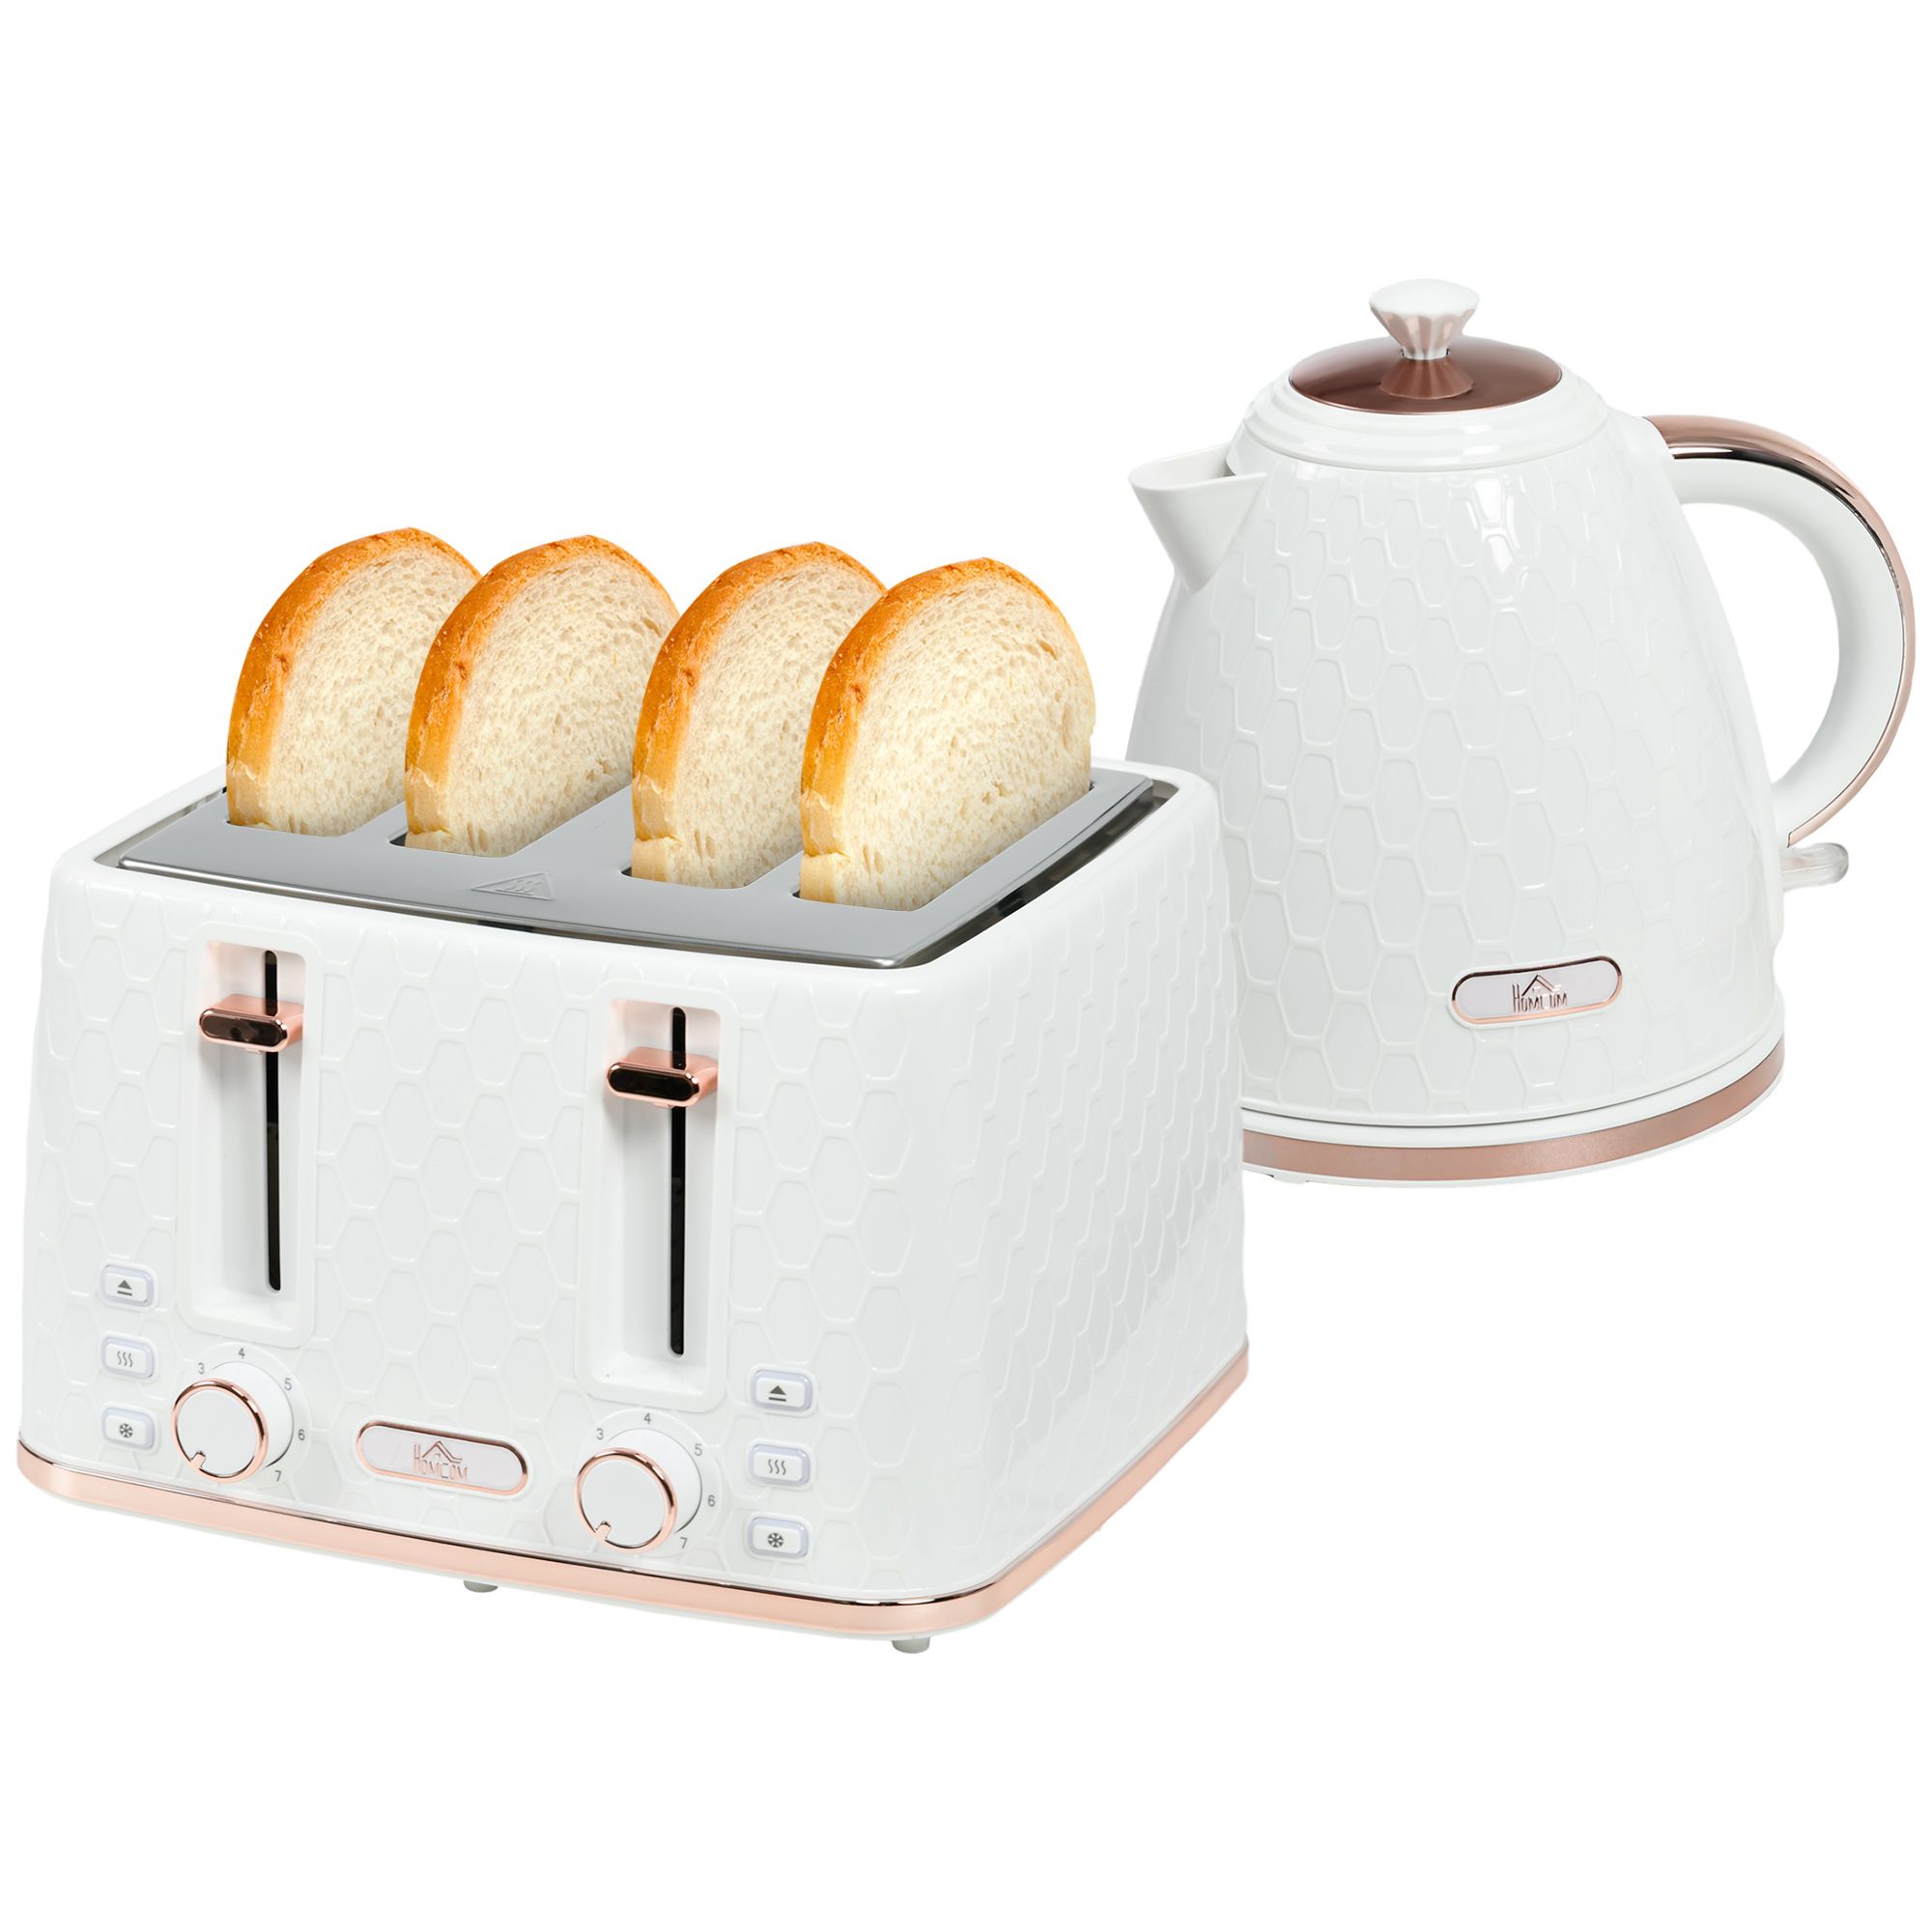 Homcom 1.7l 3000w Fast Boil Kettle & 4 Slice Toaster Set, Kettle And Toaster Set With 7 Browning Controls, Crumb Tray, White